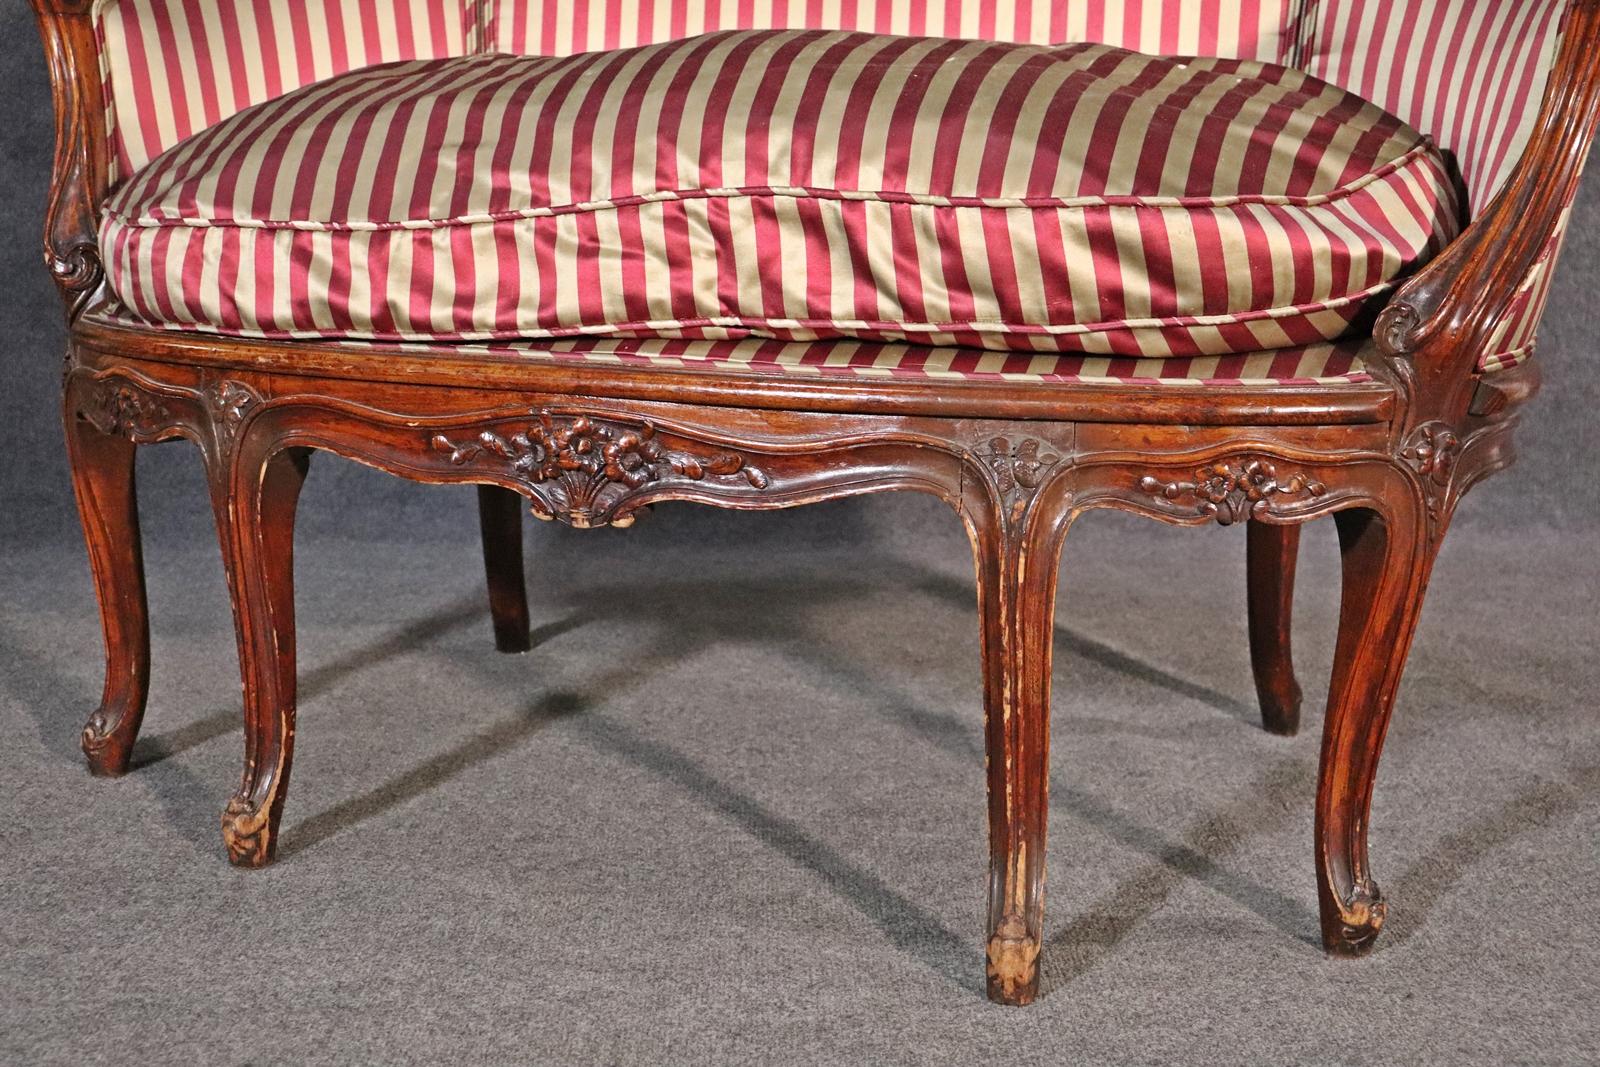 Mid-20th Century French Carved Walnut Louis XV Small Scale Settee Canape, Circa 1930